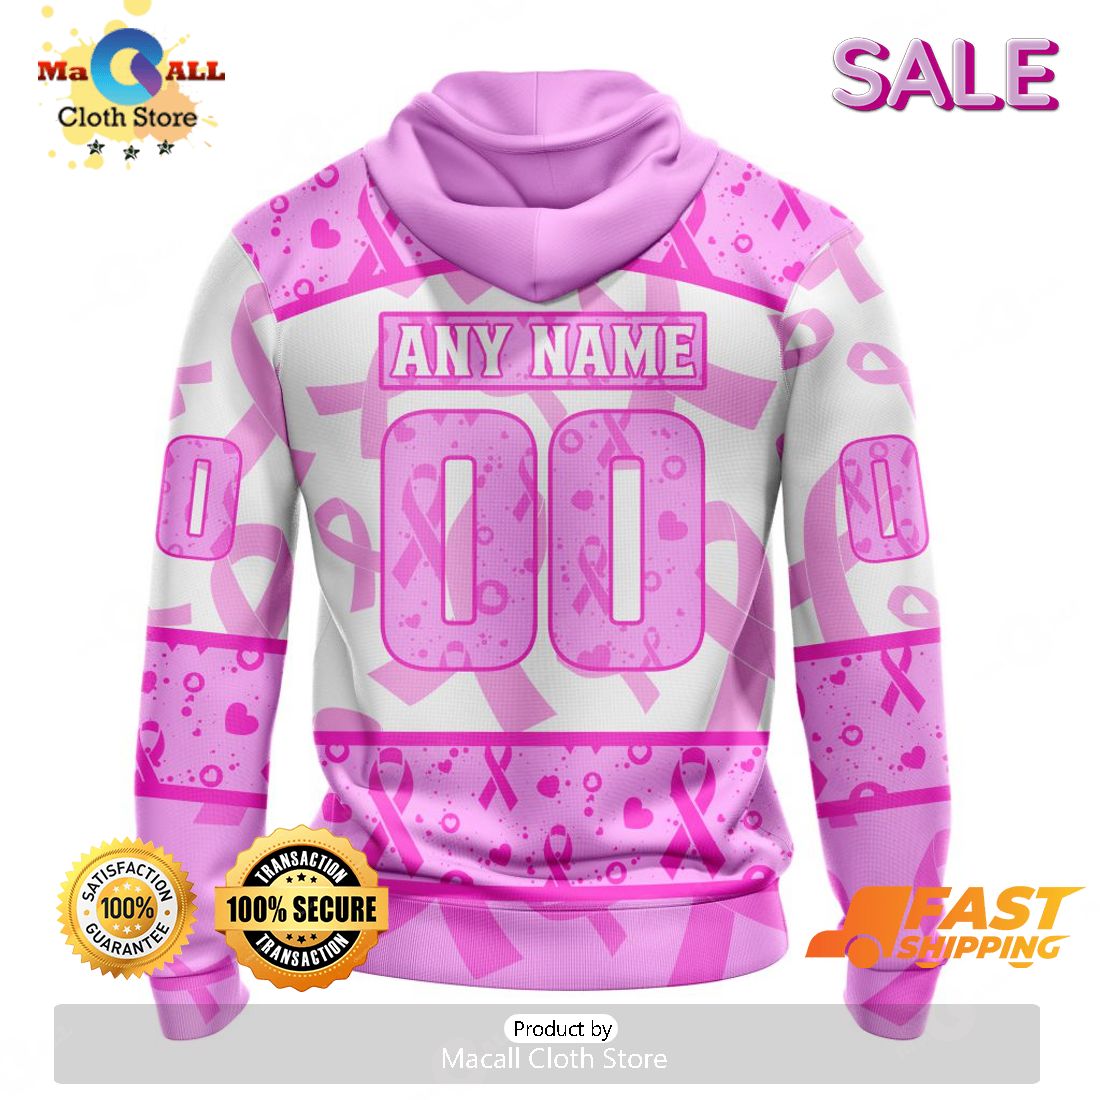 NHL Carolina Hurricanes Personalized Special Design I Pink I Can In October  We Wear Pink Breast Cancer Hoodie T Shirt - Growkoc